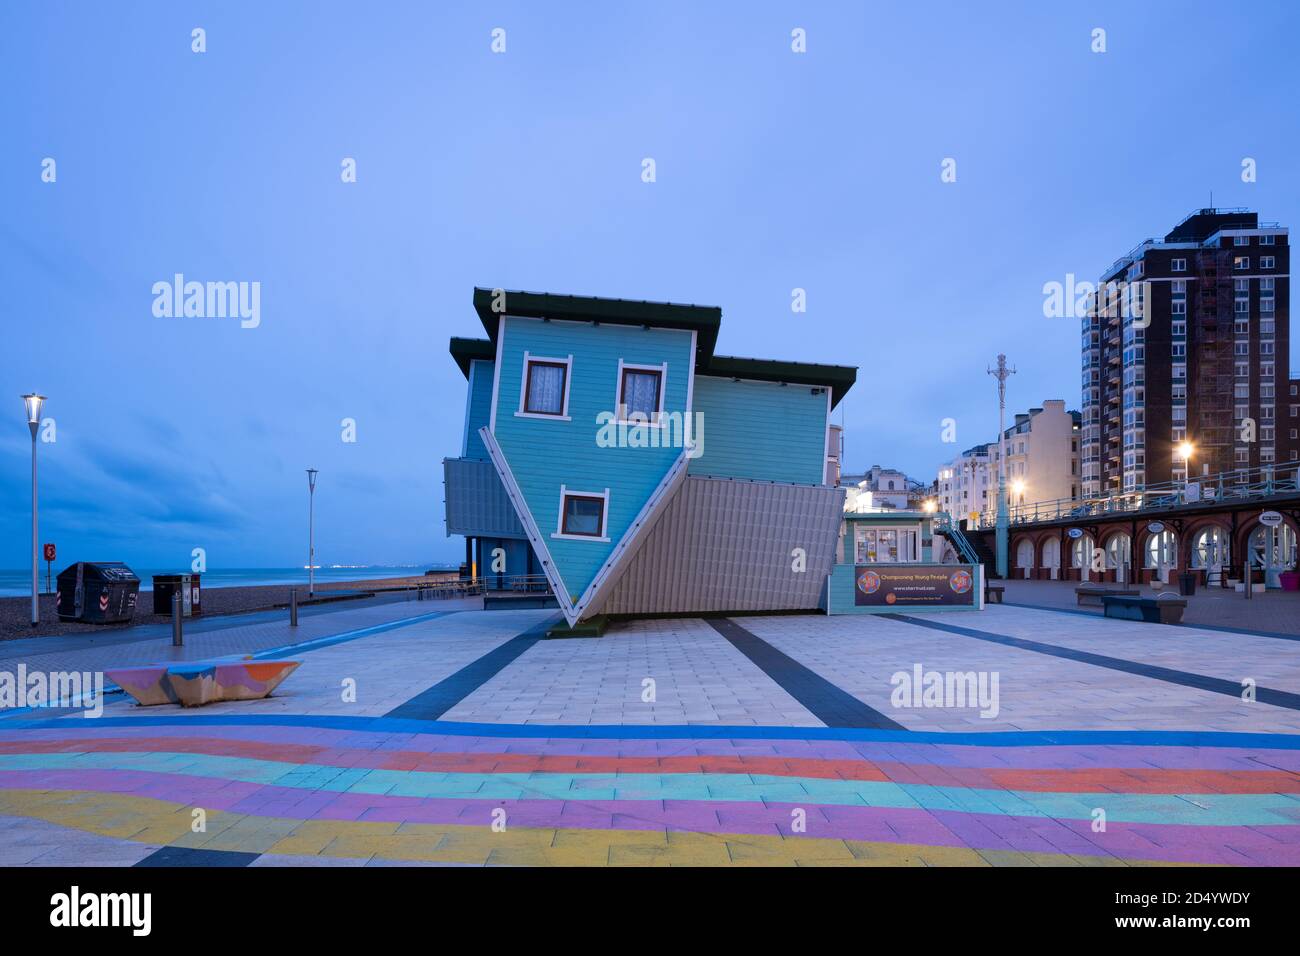 Upside Down House on Brighton seafront. Brighton, East Sussex, England, UK Stock Photo